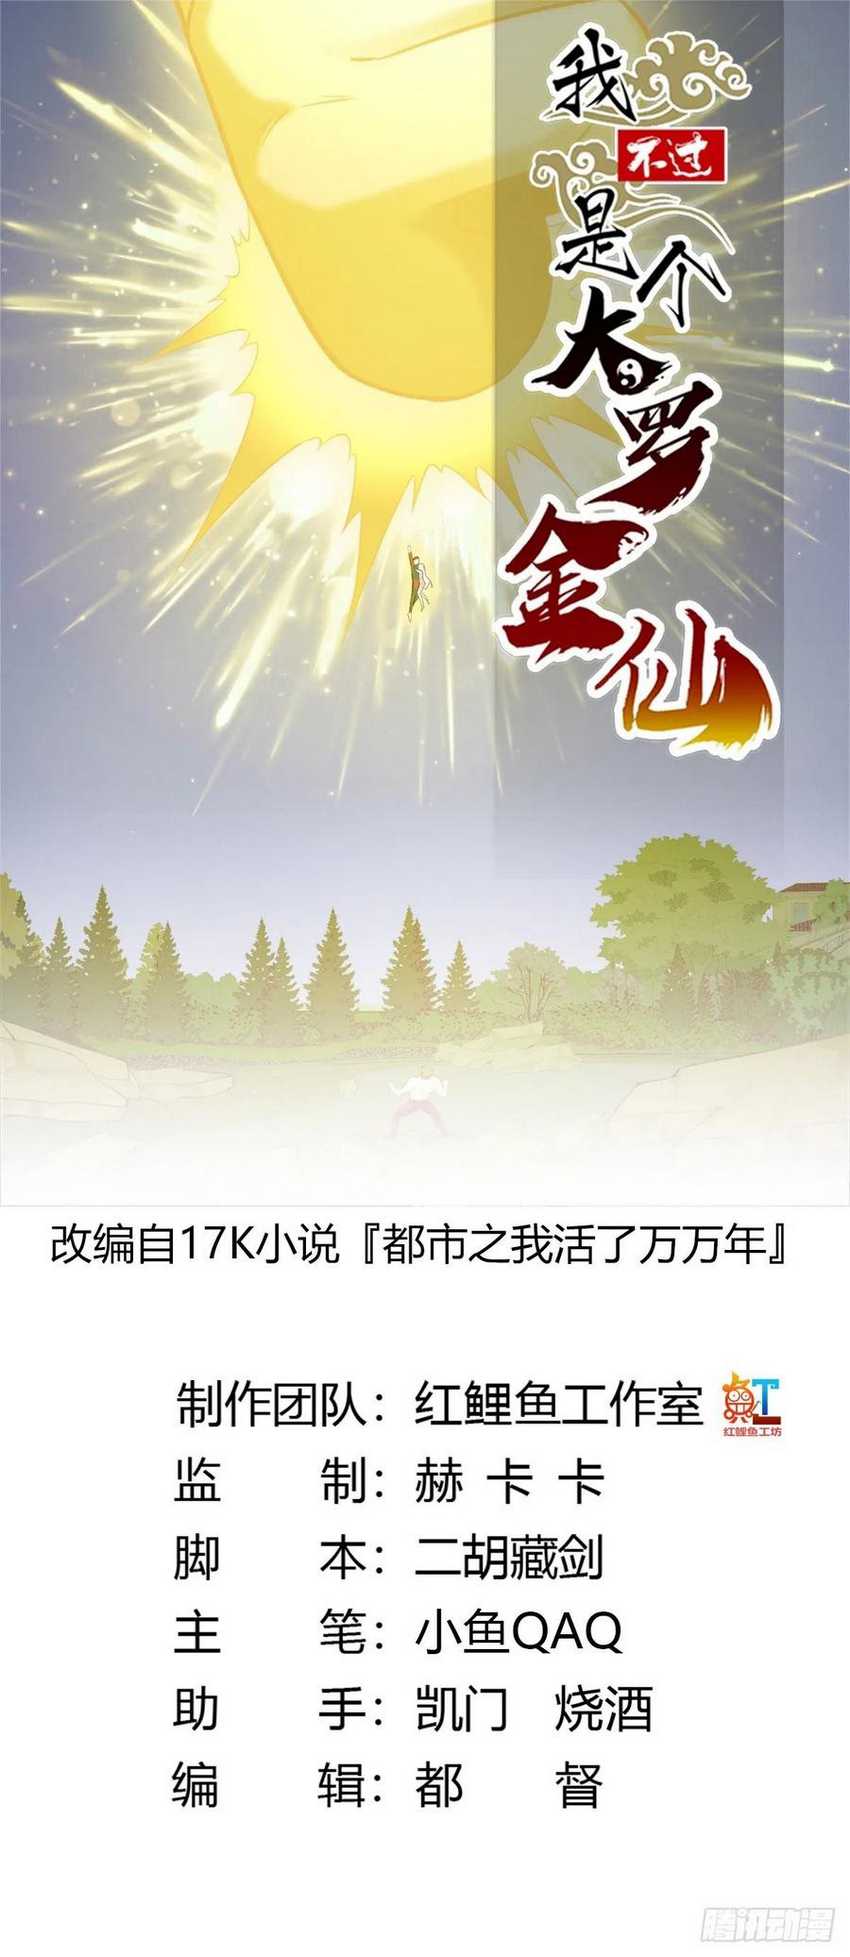 Chaos Emperor Chapter 67